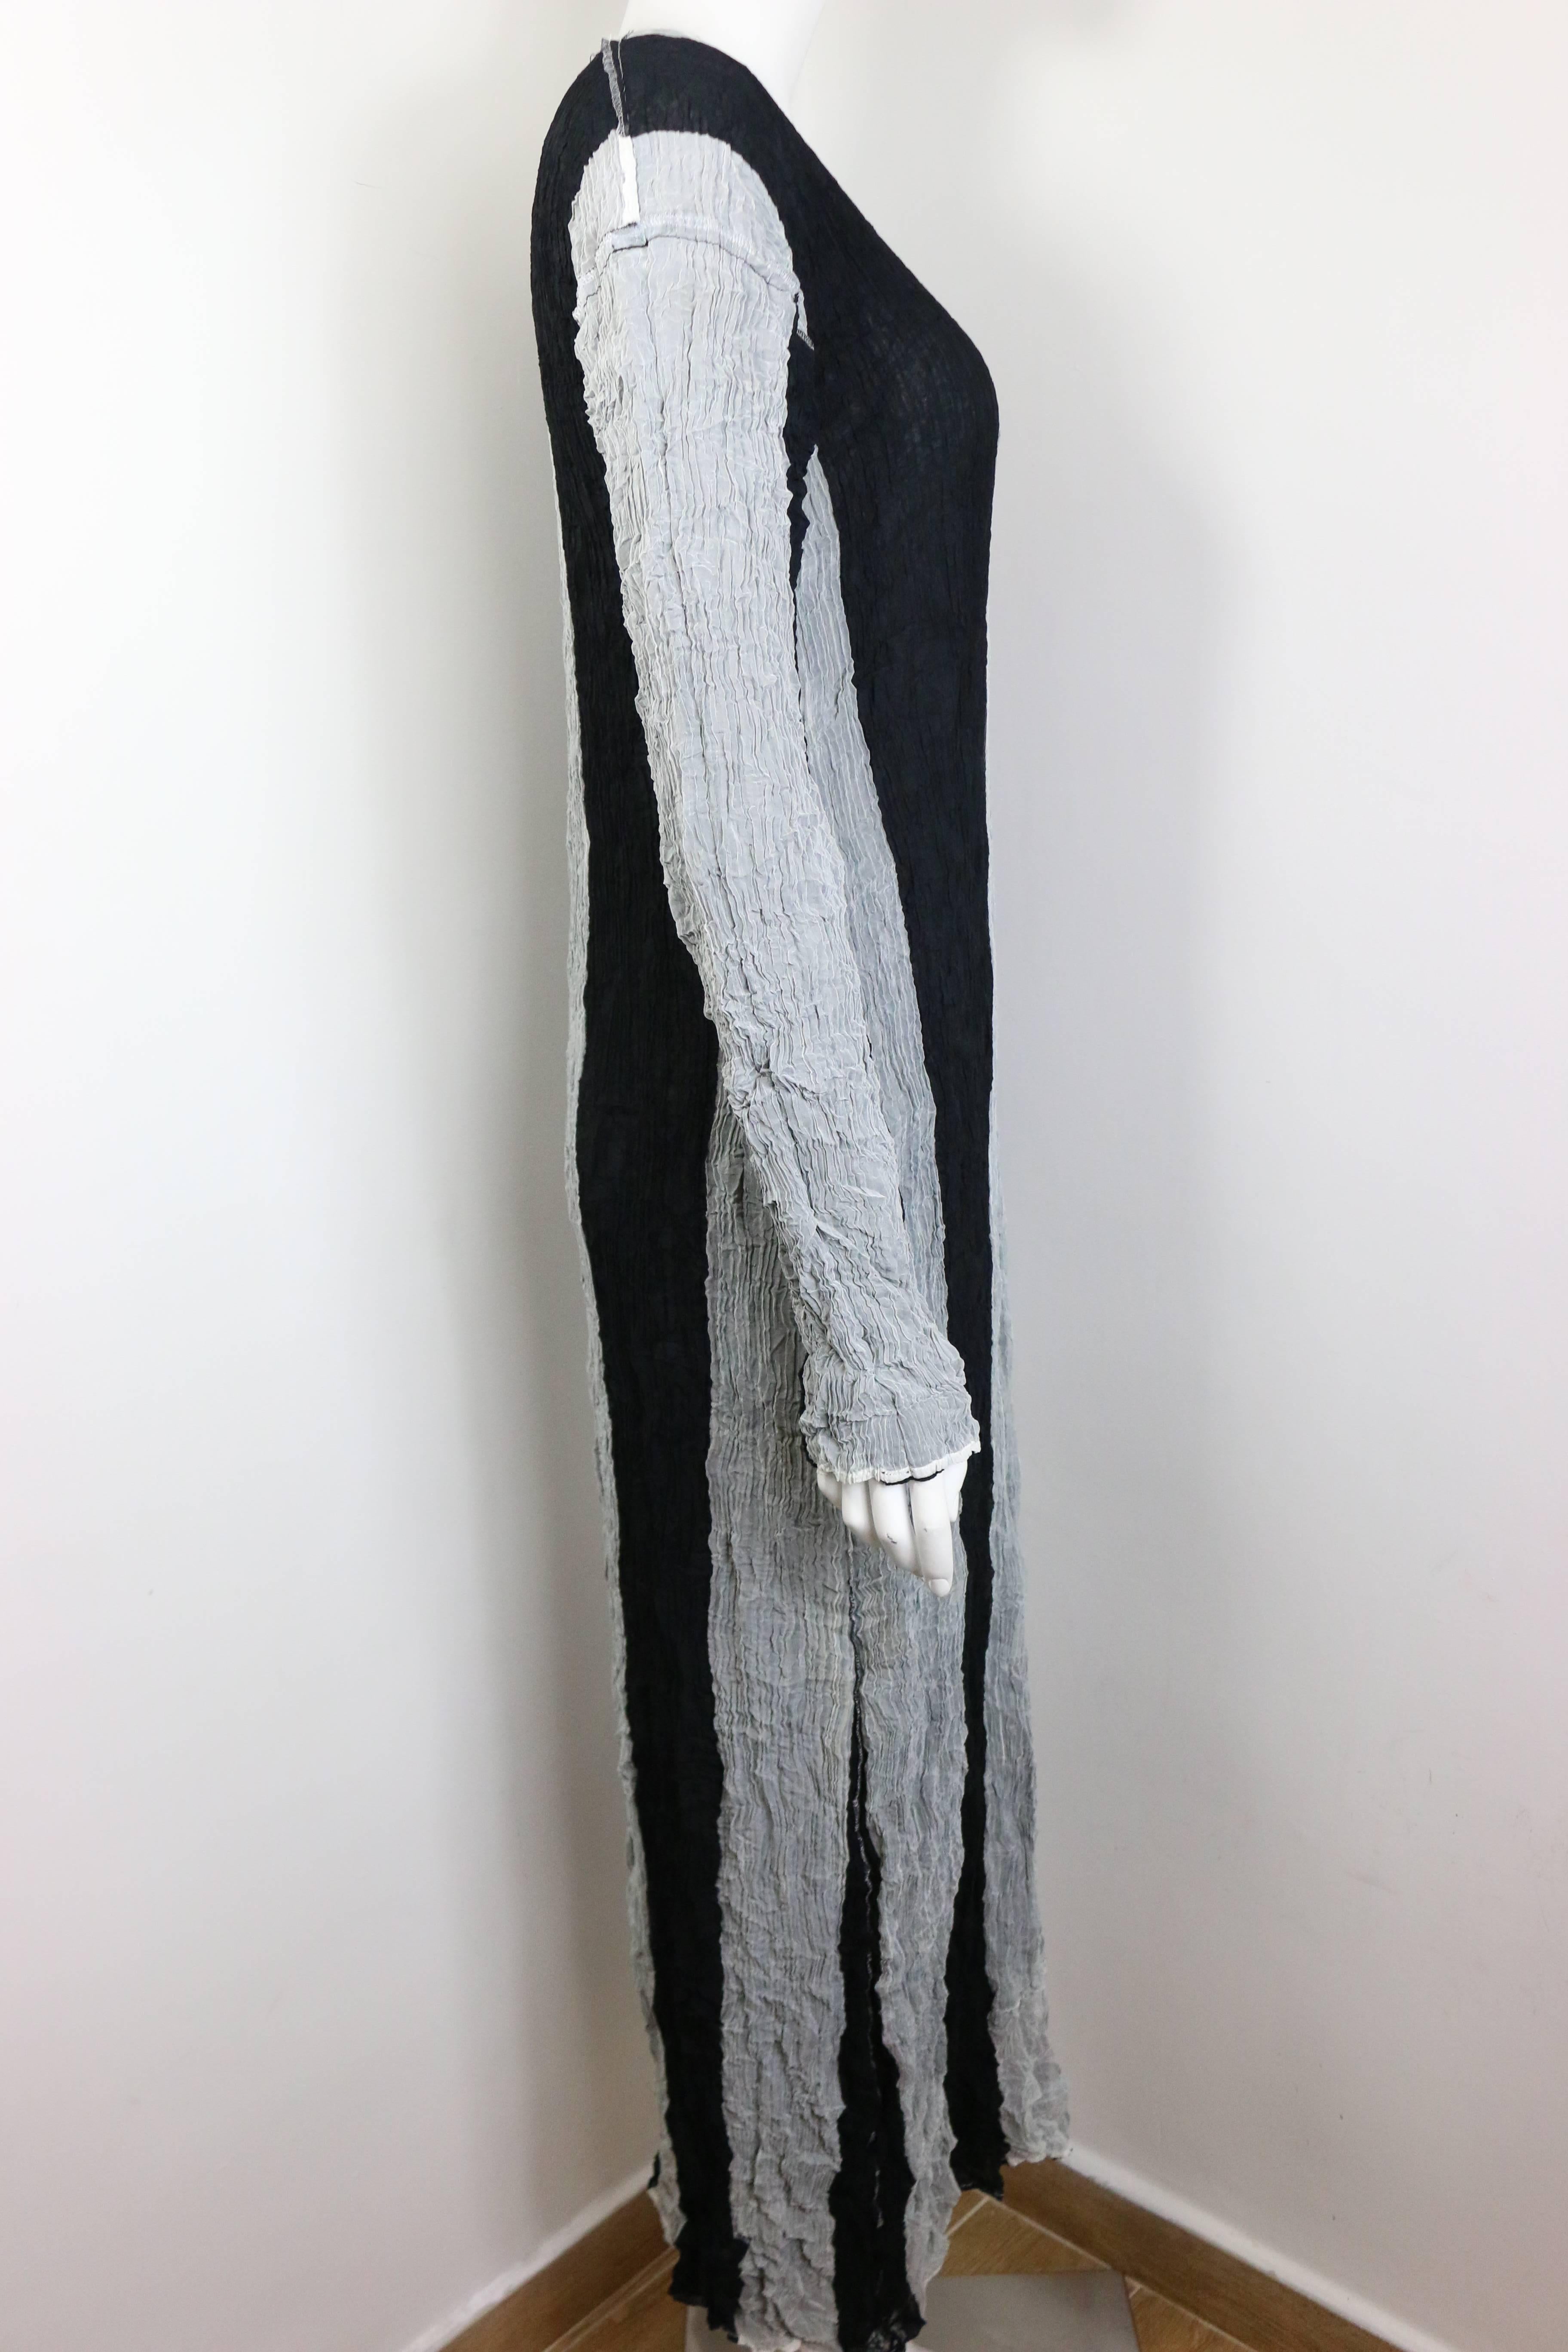 - Vintage Issey Miyake black and grey striped pleated long dress. 

- There is no size tag and name tag but it is around size Japan M. 

- Height: 52in, Bust: 32in, Waist, 26in (measurements are approximate). 